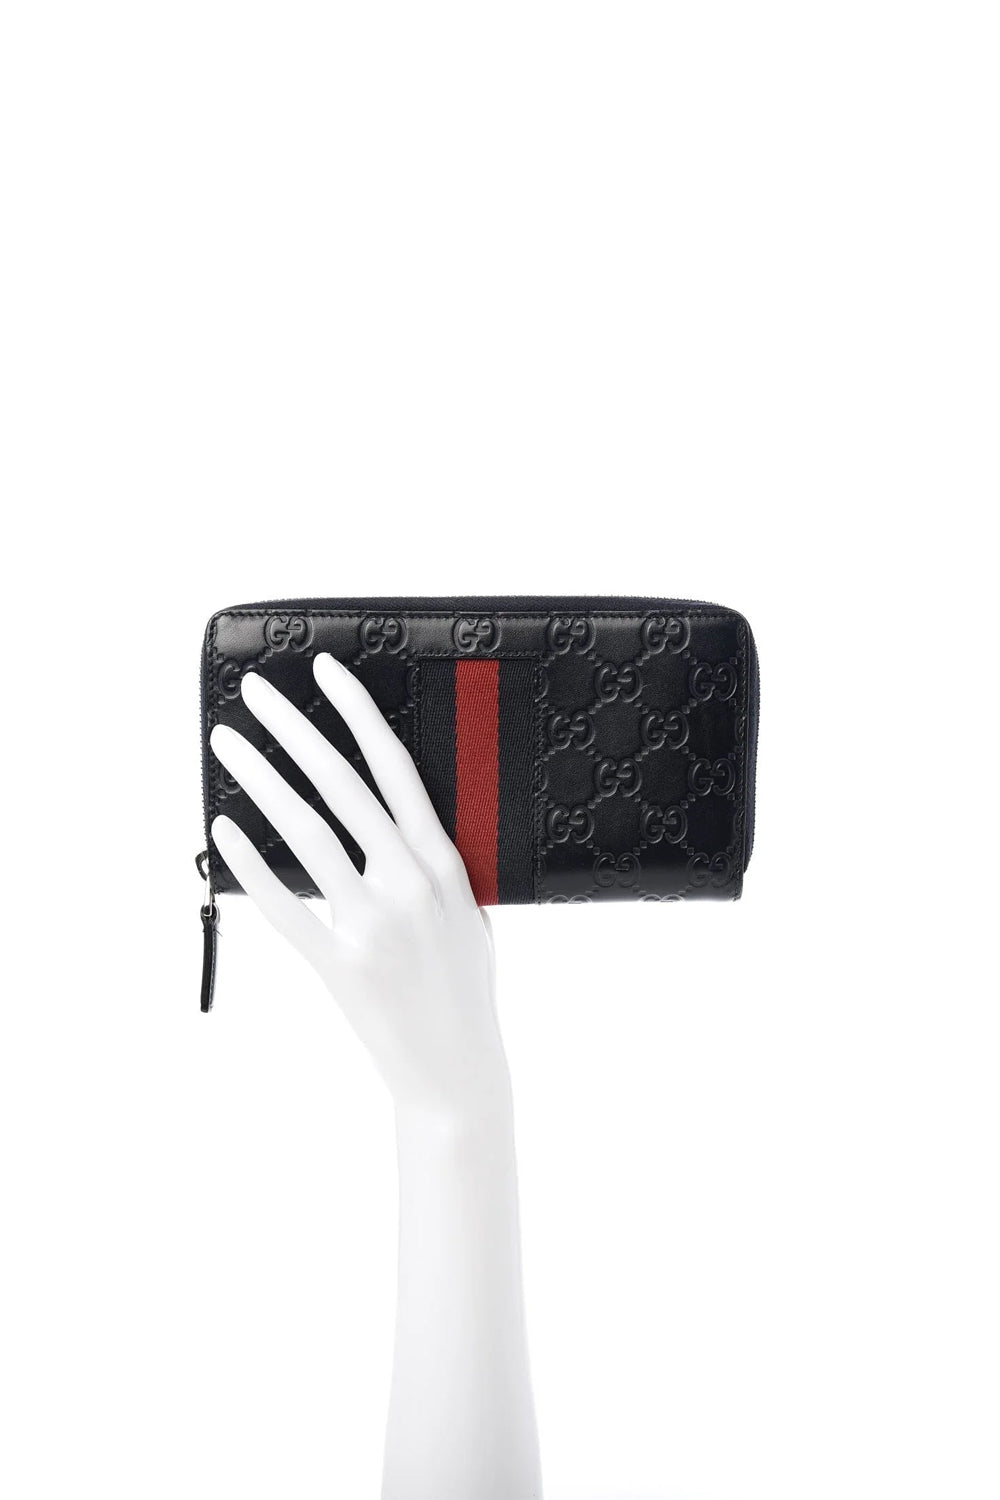 Gucci Leather Guccissima Web Stripe Long Zip Wallet